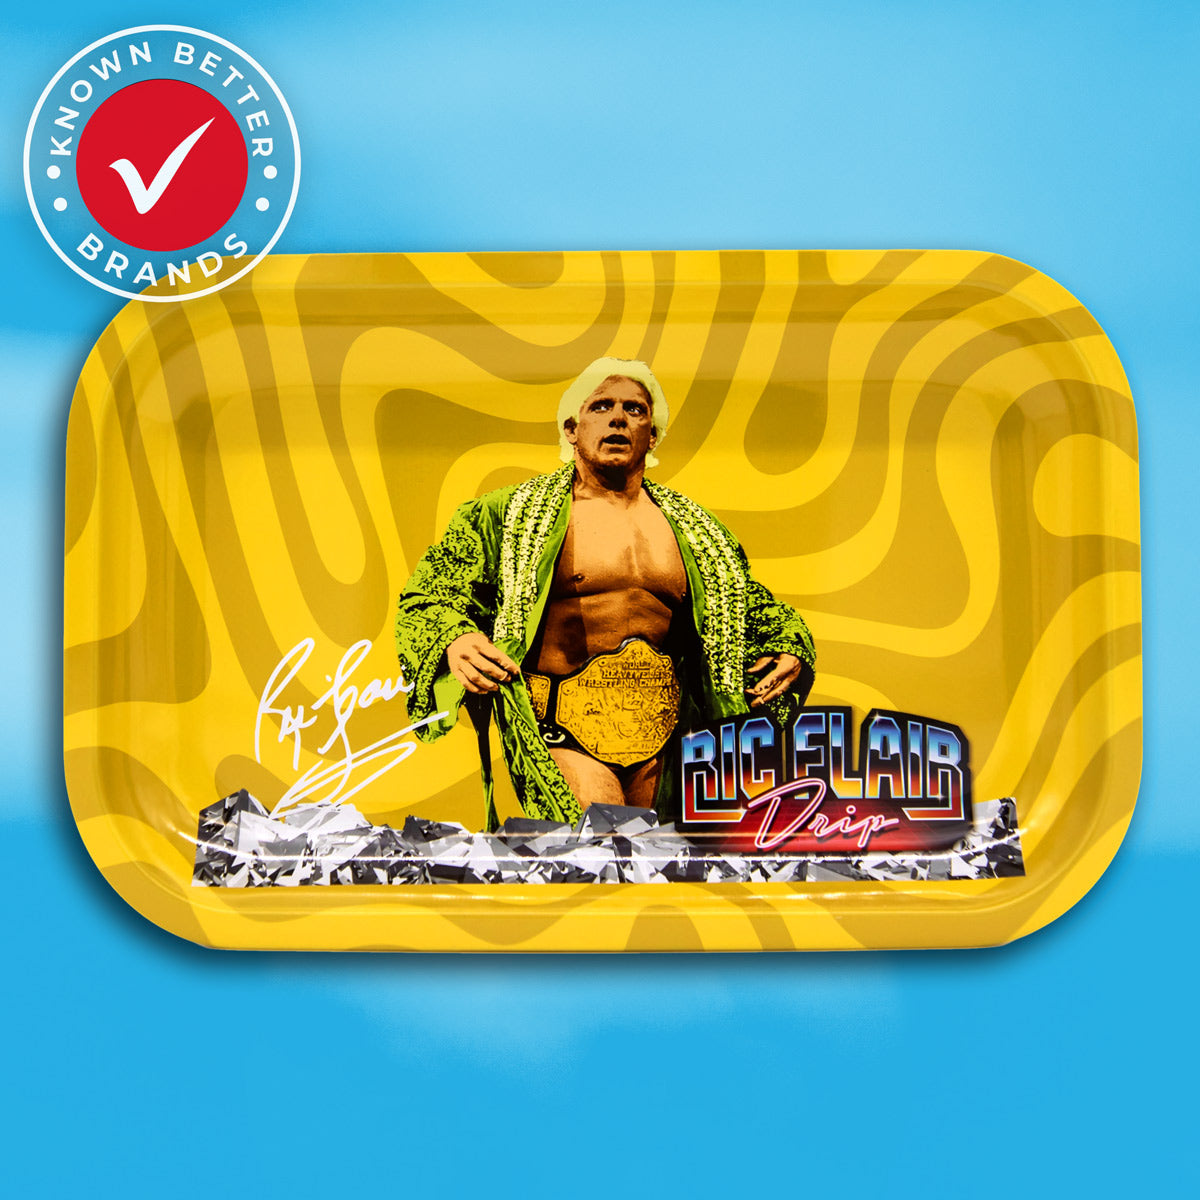 Champ Rolling Tray – Ric Flair Drip. Nature Boy charisma, exclusively from Known Better Brands. Enhance your sesh with Big Ric Energy! Official RFD Product with multiple size options.